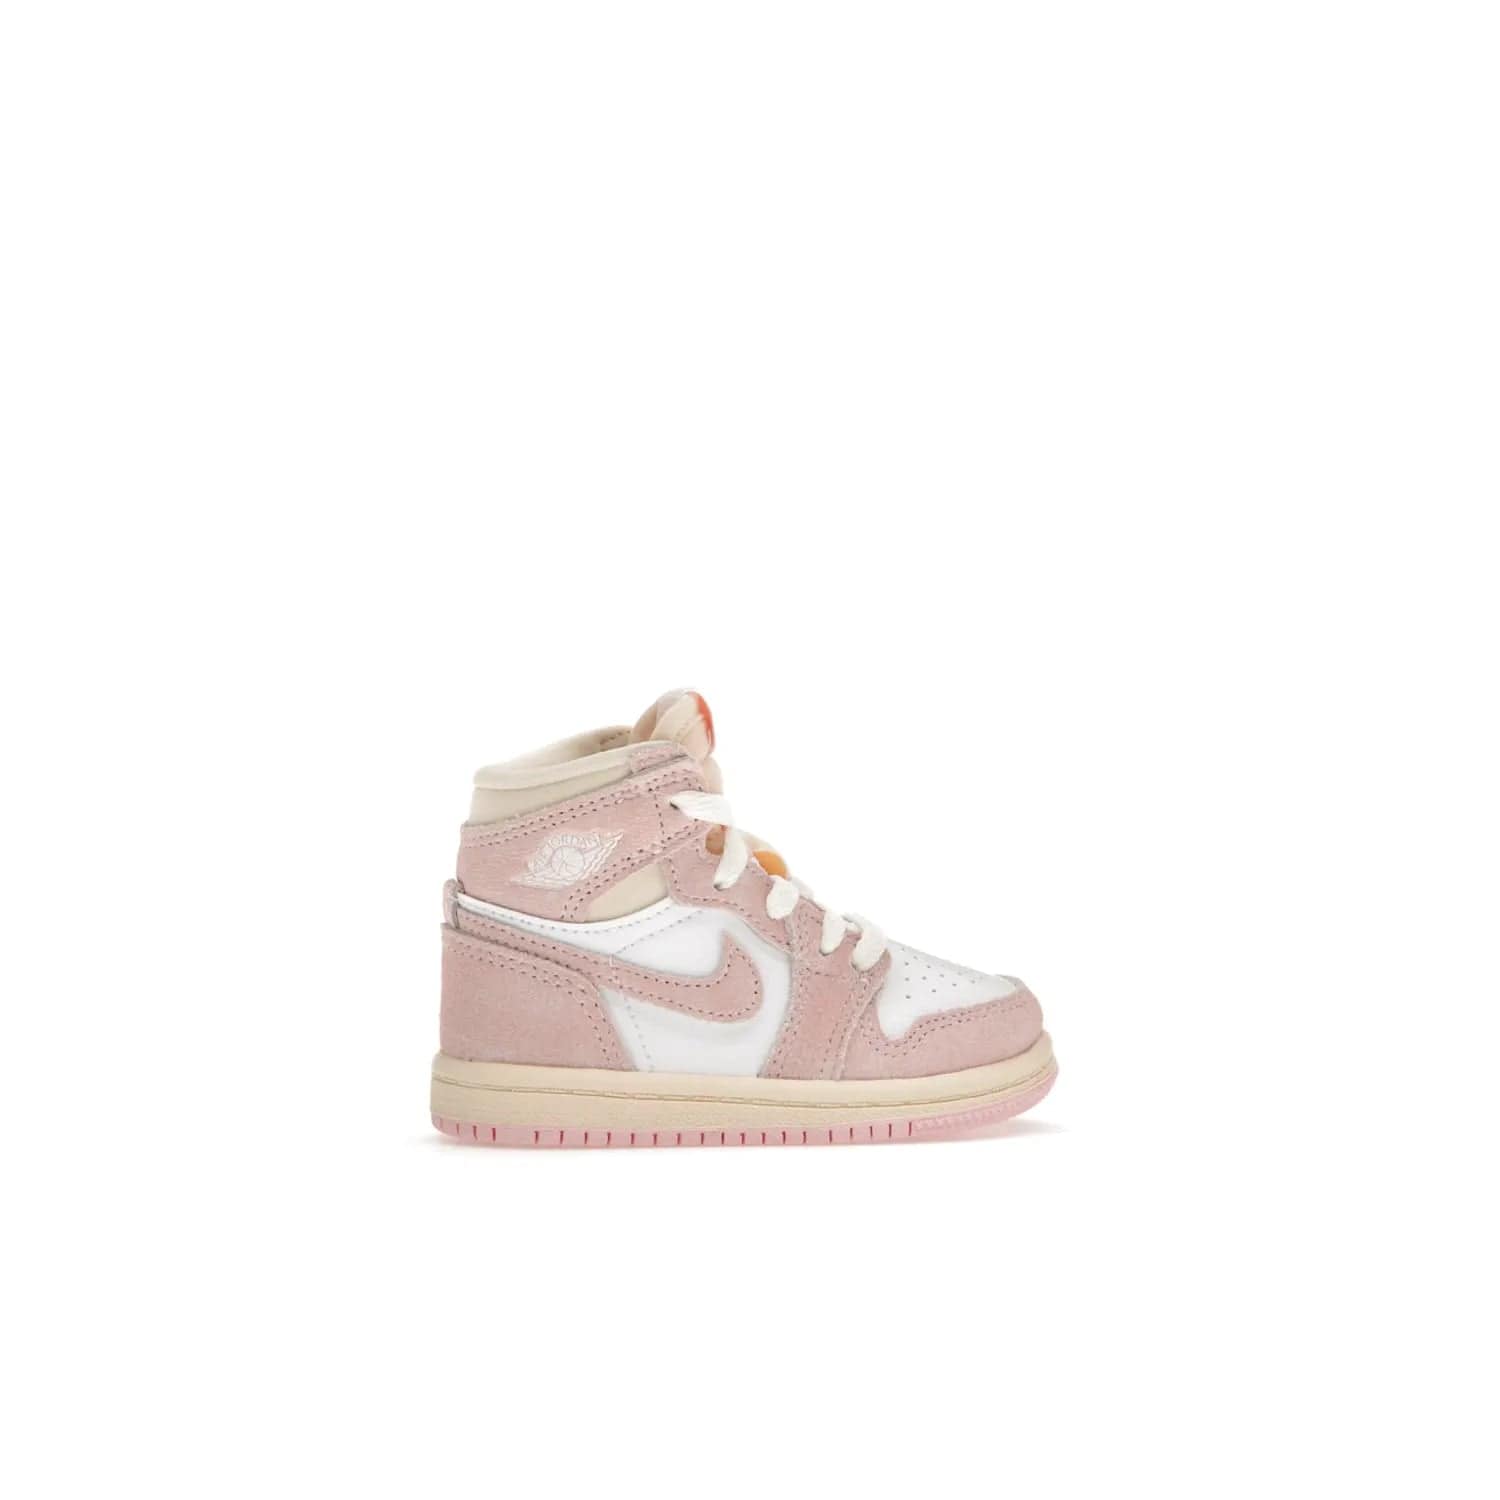 Jordan 1 Retro High OG Washed Pink (TD) - Image 36 - Only at www.BallersClubKickz.com - Retro style meets modern comfort: Introducing the Jordan 1 High OG Washed Pink (TD). Combining Atmosphere/White/Muslin/Sail colors with a high-rise silhouette, these shoes will be an instant classic when they release April 22, 2023.